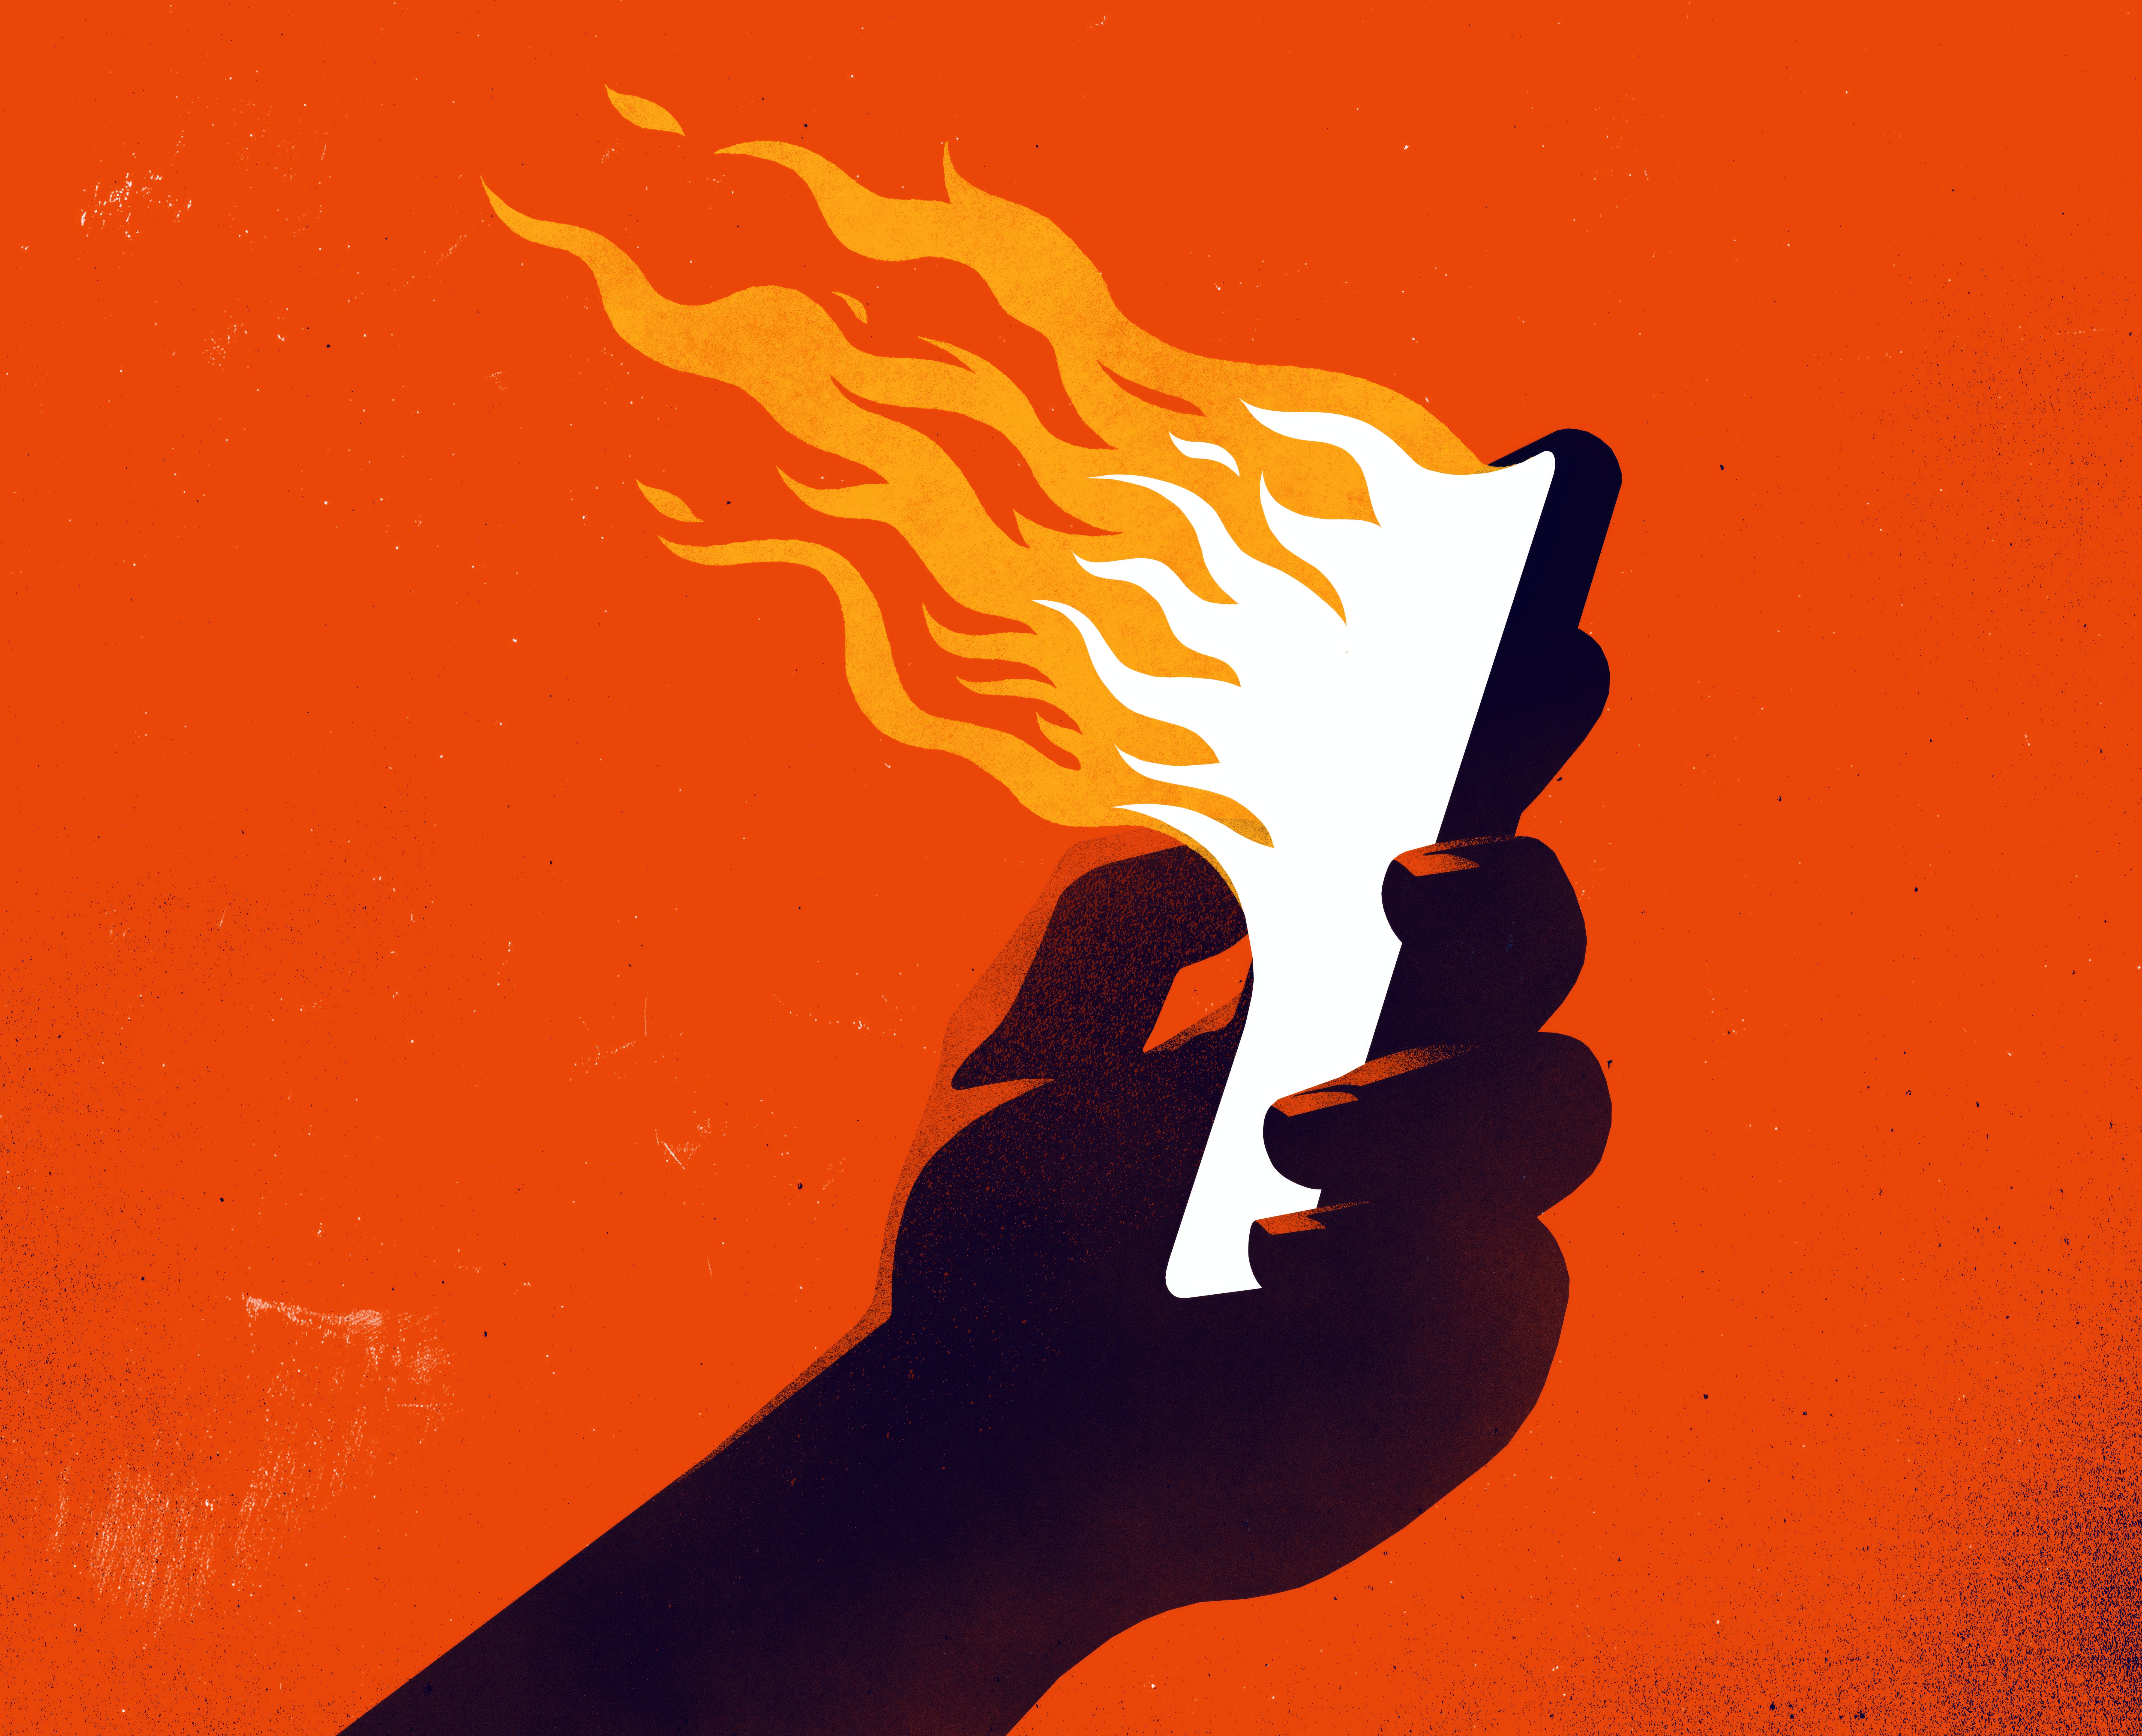 This illustration depicts a hand holding a smartphone emanating flames. The flames are rendered in a bright, fiery orange and white, creating a stark contrast against the dark background and the black silhouette of the hand and phone.